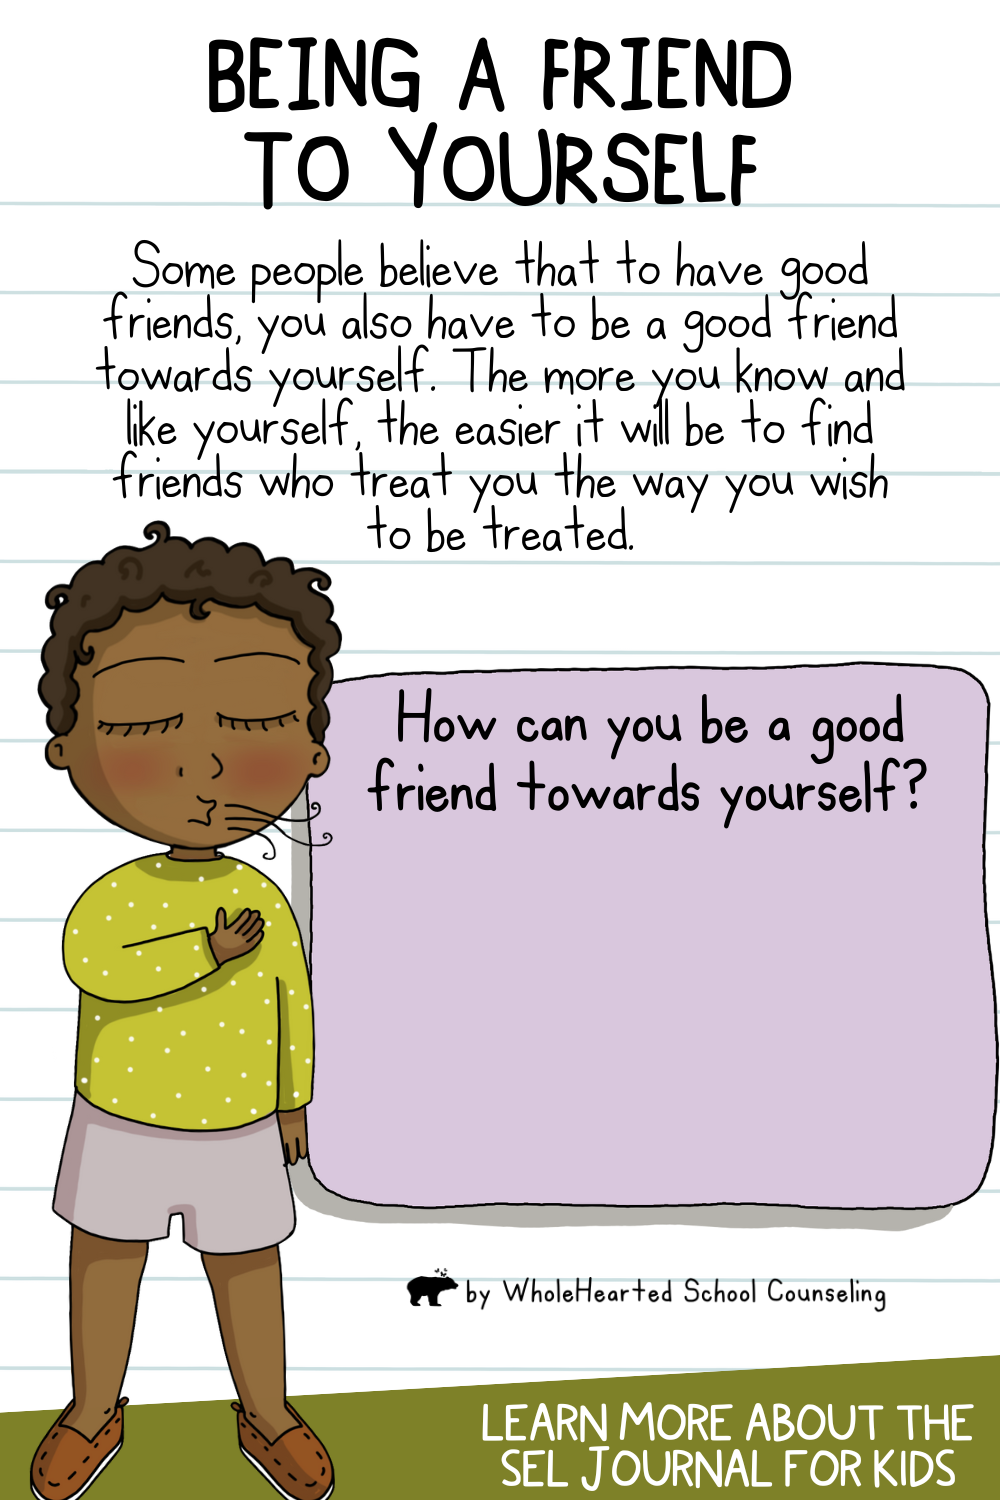 How to be a good friend towards yourself infographic